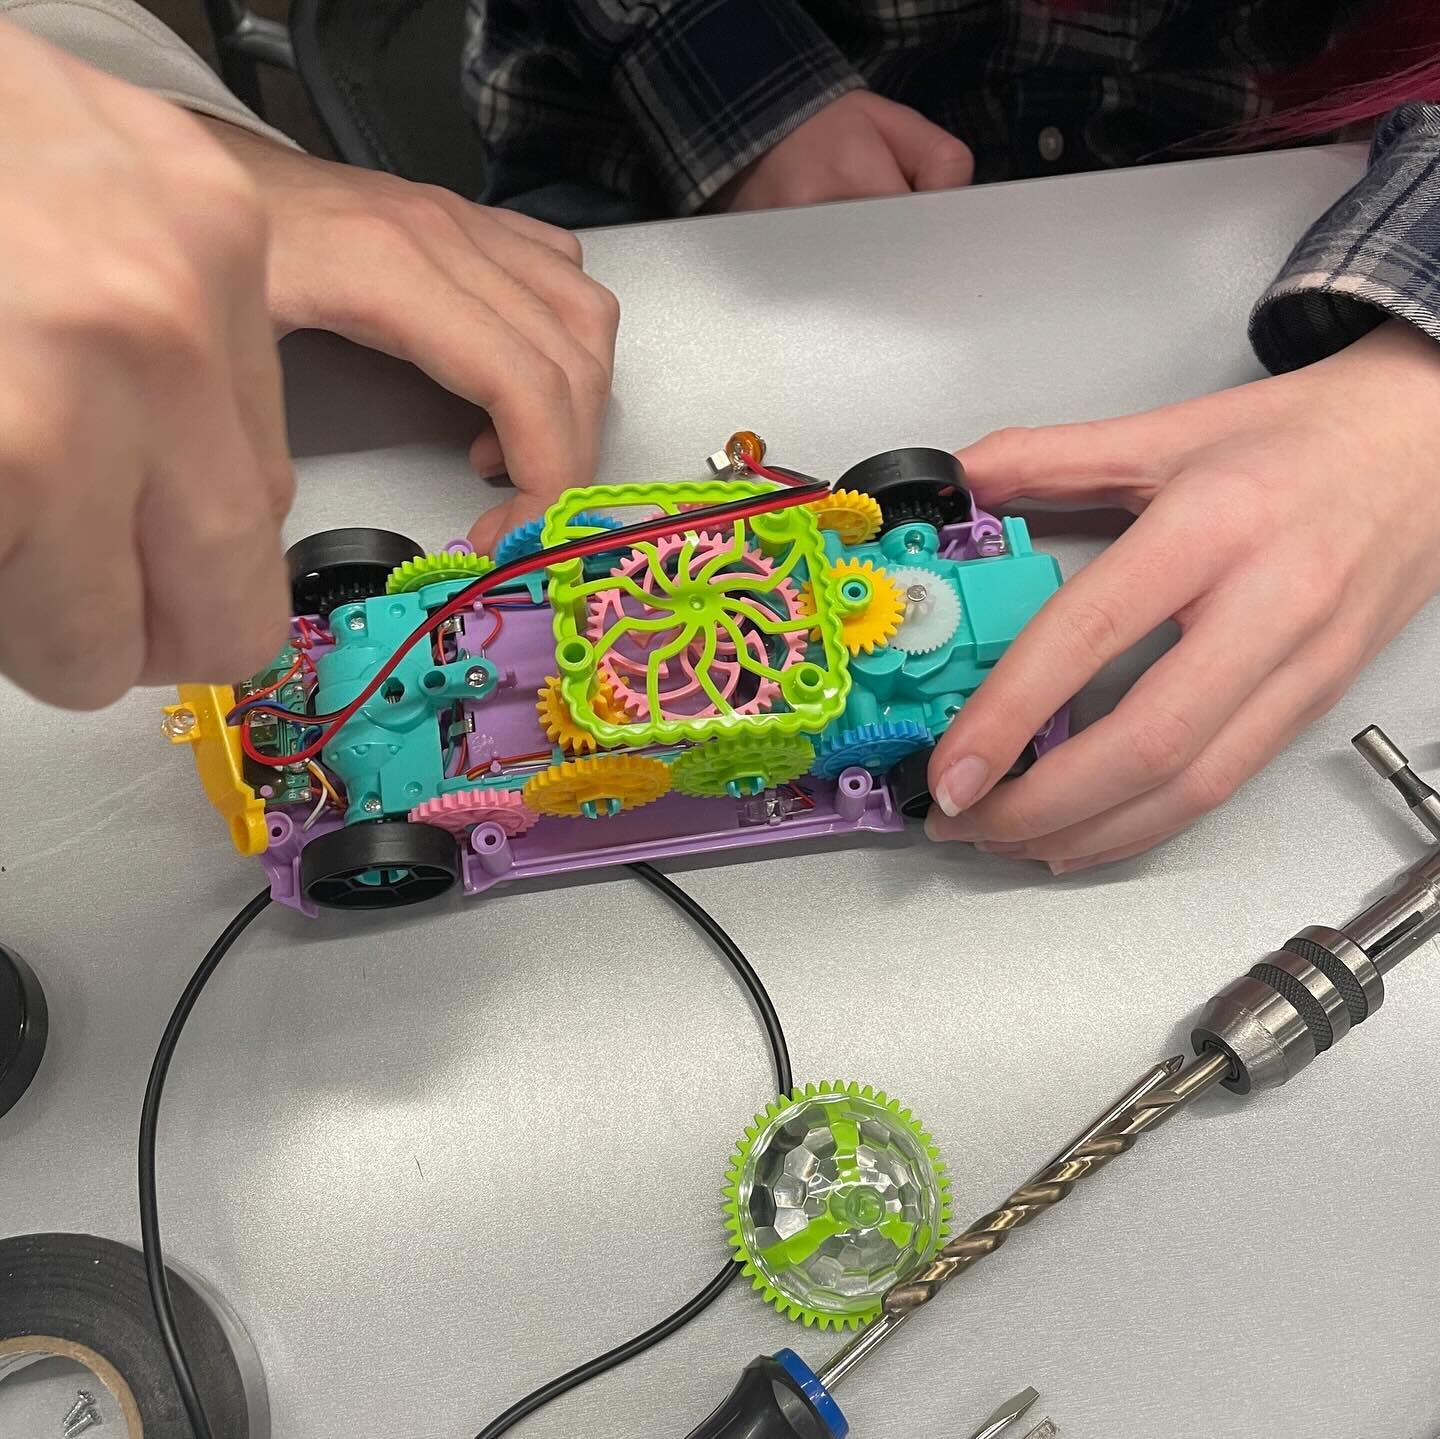 At our final toy adaptation event of last quarter, attendees were able to adapt new toys as well as repair some broken ones. Some of the toys adapted included a transparent light-up car, and tornado lamp, while a spin art toy and penguin slide were g